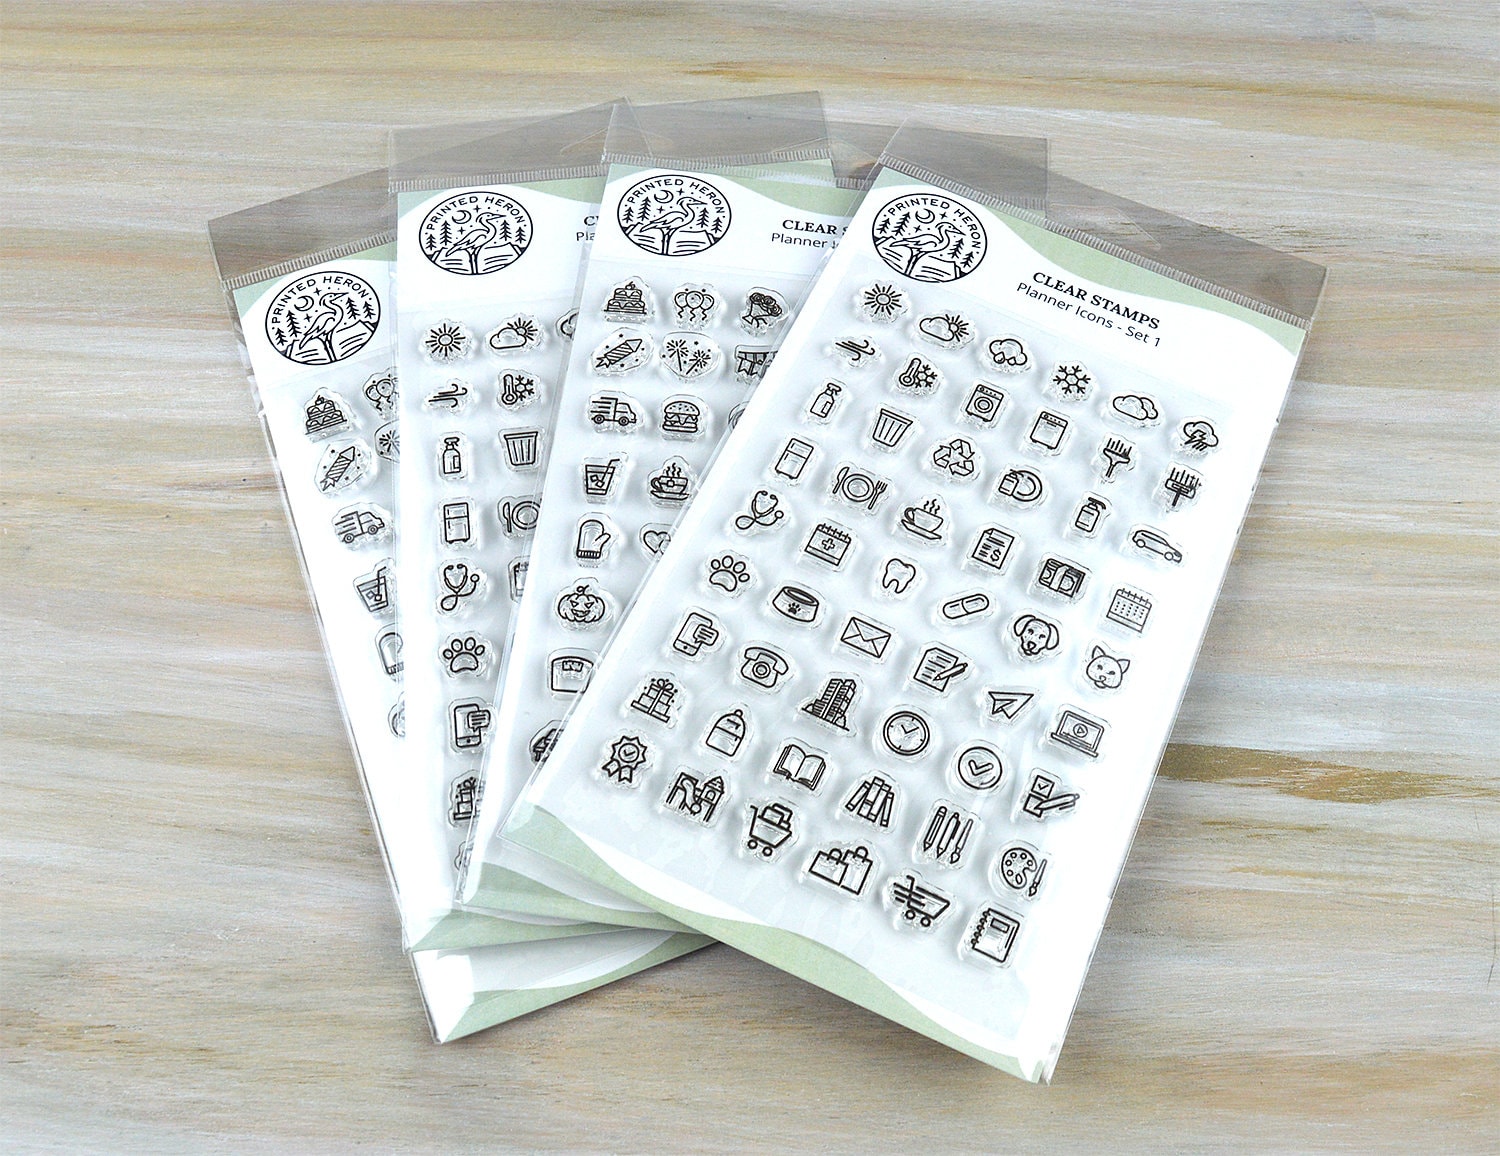 Daily Planner Stamps Clear Planner Journal Stamps Plan It Stamp Set For  Planner - Stamps - AliExpress